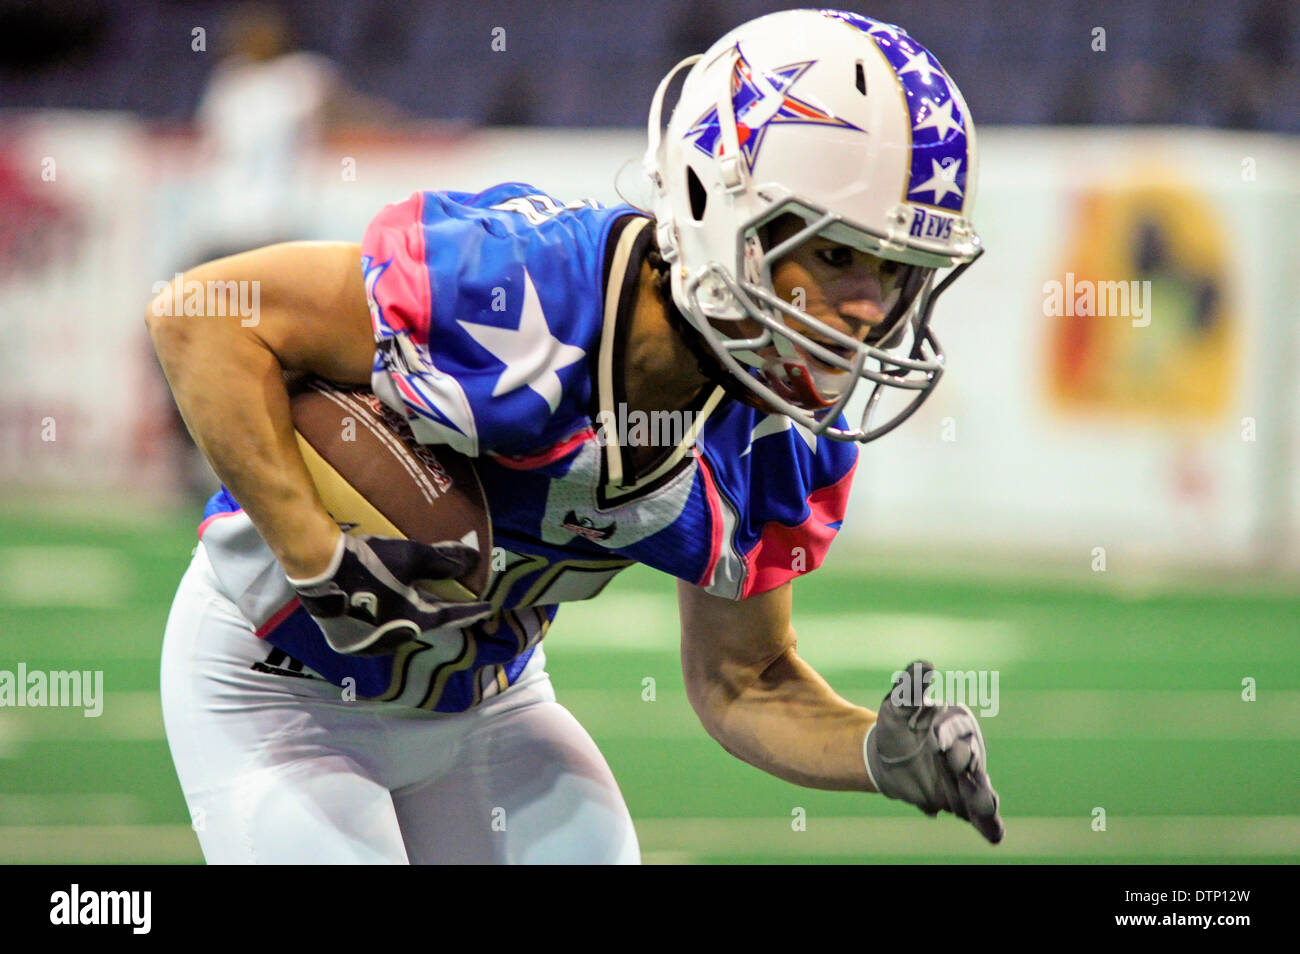 Allen, TX, USA. 21st Feb, 2014. Texas Revolution running back Jennifer Welter (47) during pre game warmups prior to the Revolution playing the Cedar Rapids Titans in an Indoor Football League game at the Allen Event Center Friday, February 21, 2014, in Allen, Texas. The 5-foot-2-inch, 130 pound Welter is the first woman to play professional football at a position other than kicker, she made the final roster of the Texas Revolution of the Indoor Football League, as a running back. © csm/Alamy Live News Stock Photo